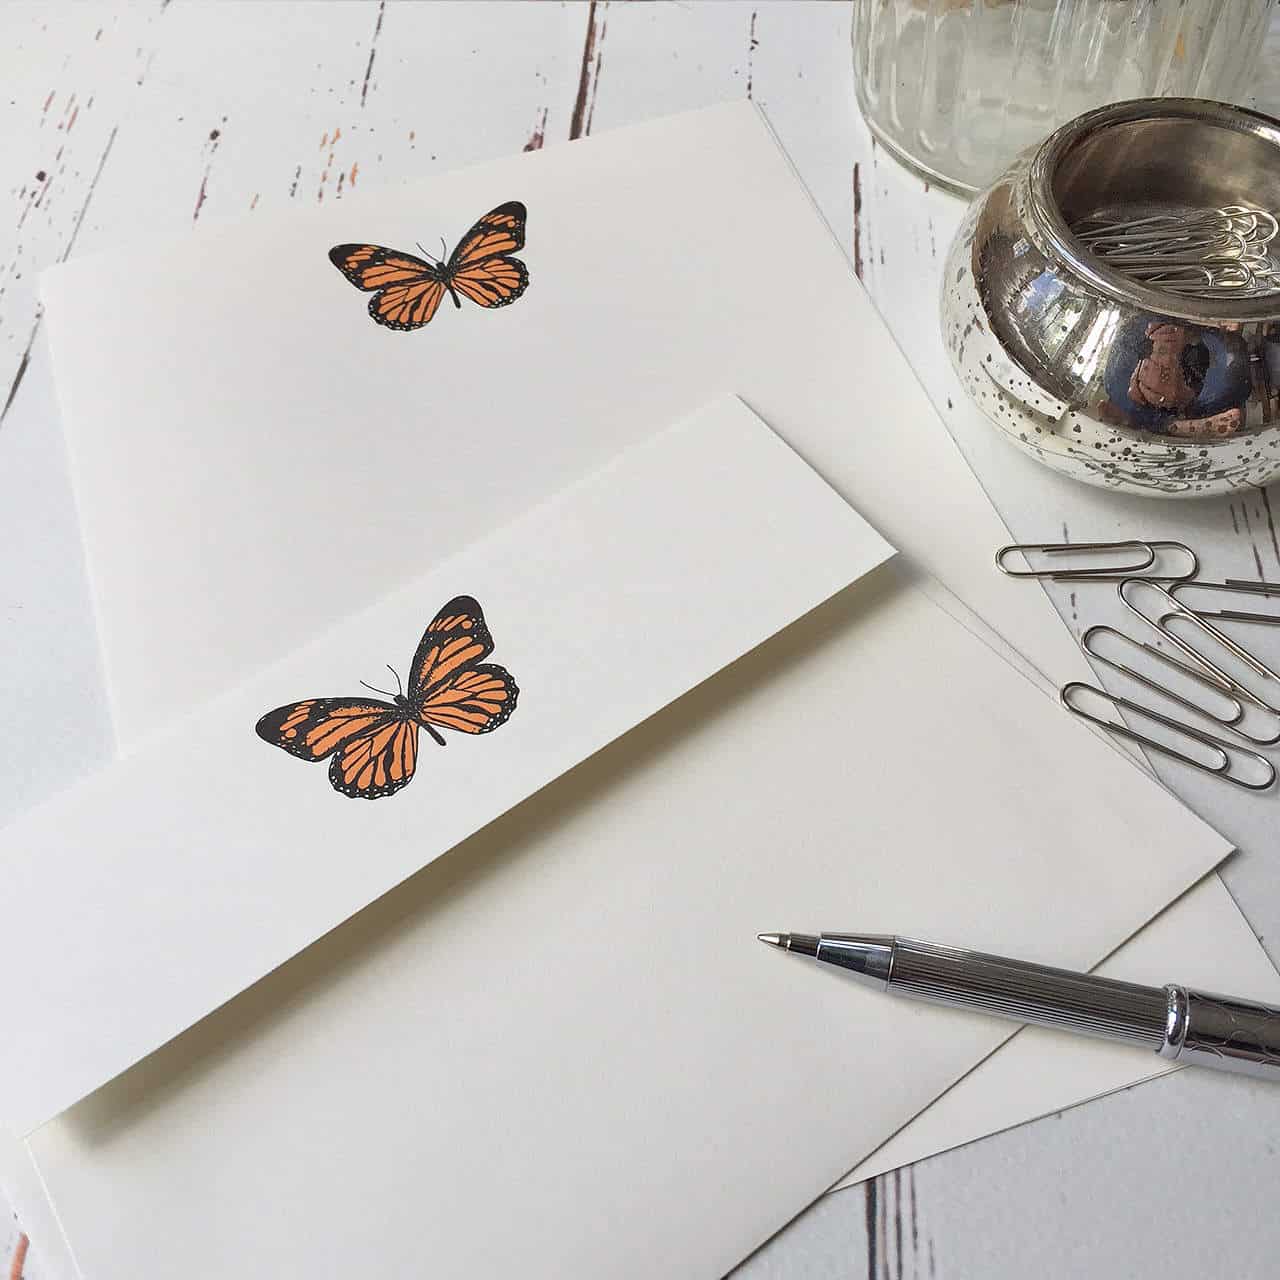 36 Wagtail Designs Writing Paper Gift Set with a Butterfly Design in a Lovely Black Box with Ribbon